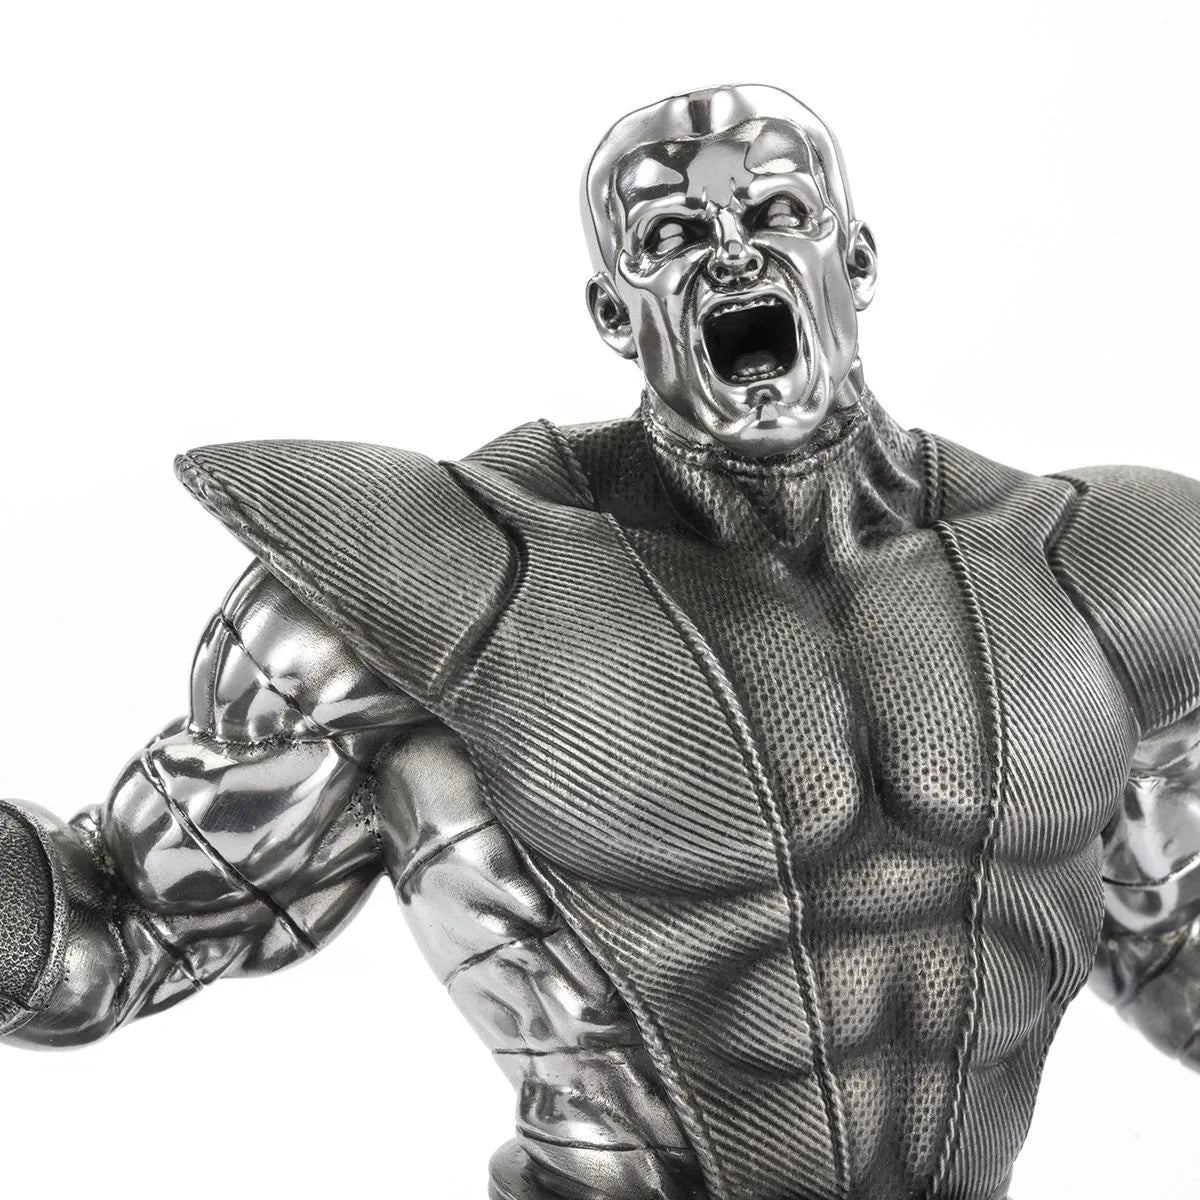 Colossus Victorious Limited Edition Metal Figurine by Royal Selangor -Royal Selangor - India - www.superherotoystore.com